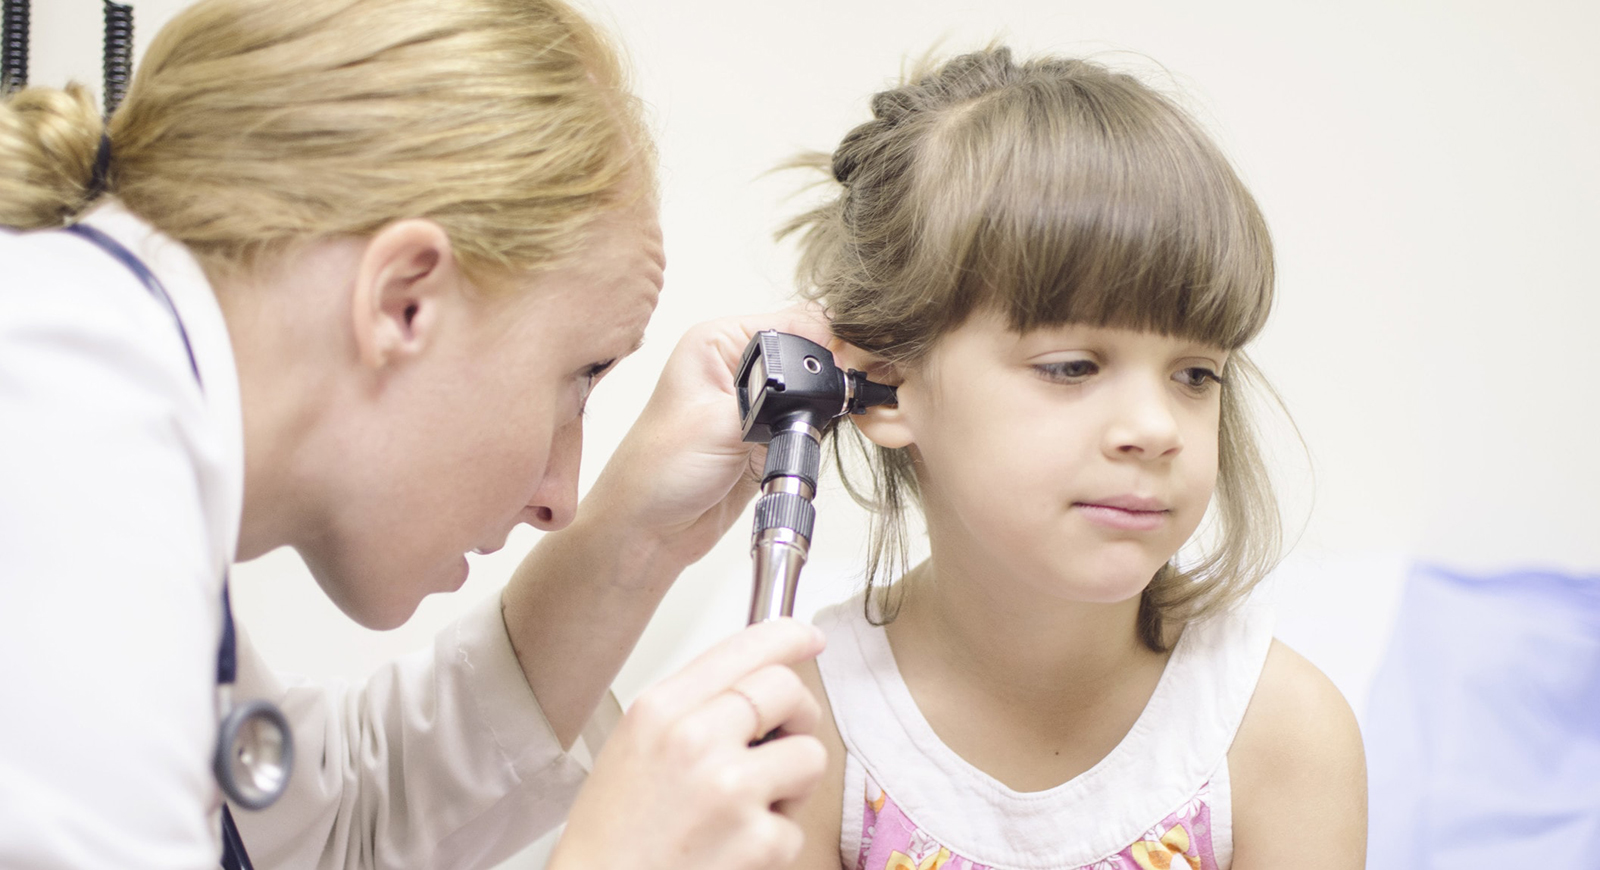 Photo of a medical professional in a white coat looks into a child's ear in an exam room.